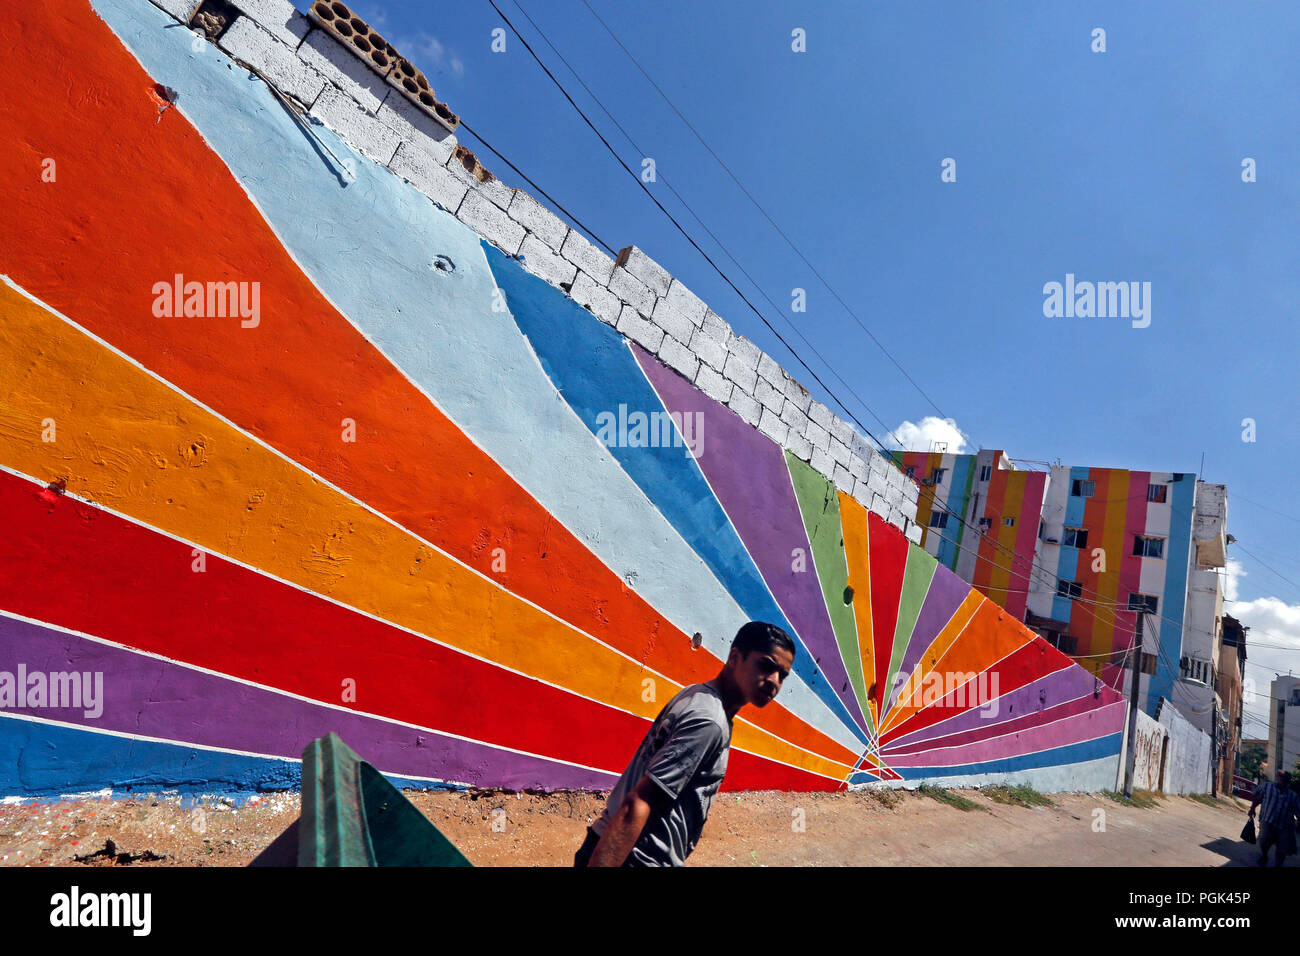 Ouzai, Lebanon. 26th Aug, 2018. A man walks past buildings with colorful paintings in Ouzai, south of Beirut, Lebanon, on Aug. 26, 2018. Credit: Bilal Jawich/Xinhua/Alamy Live News Stock Photo